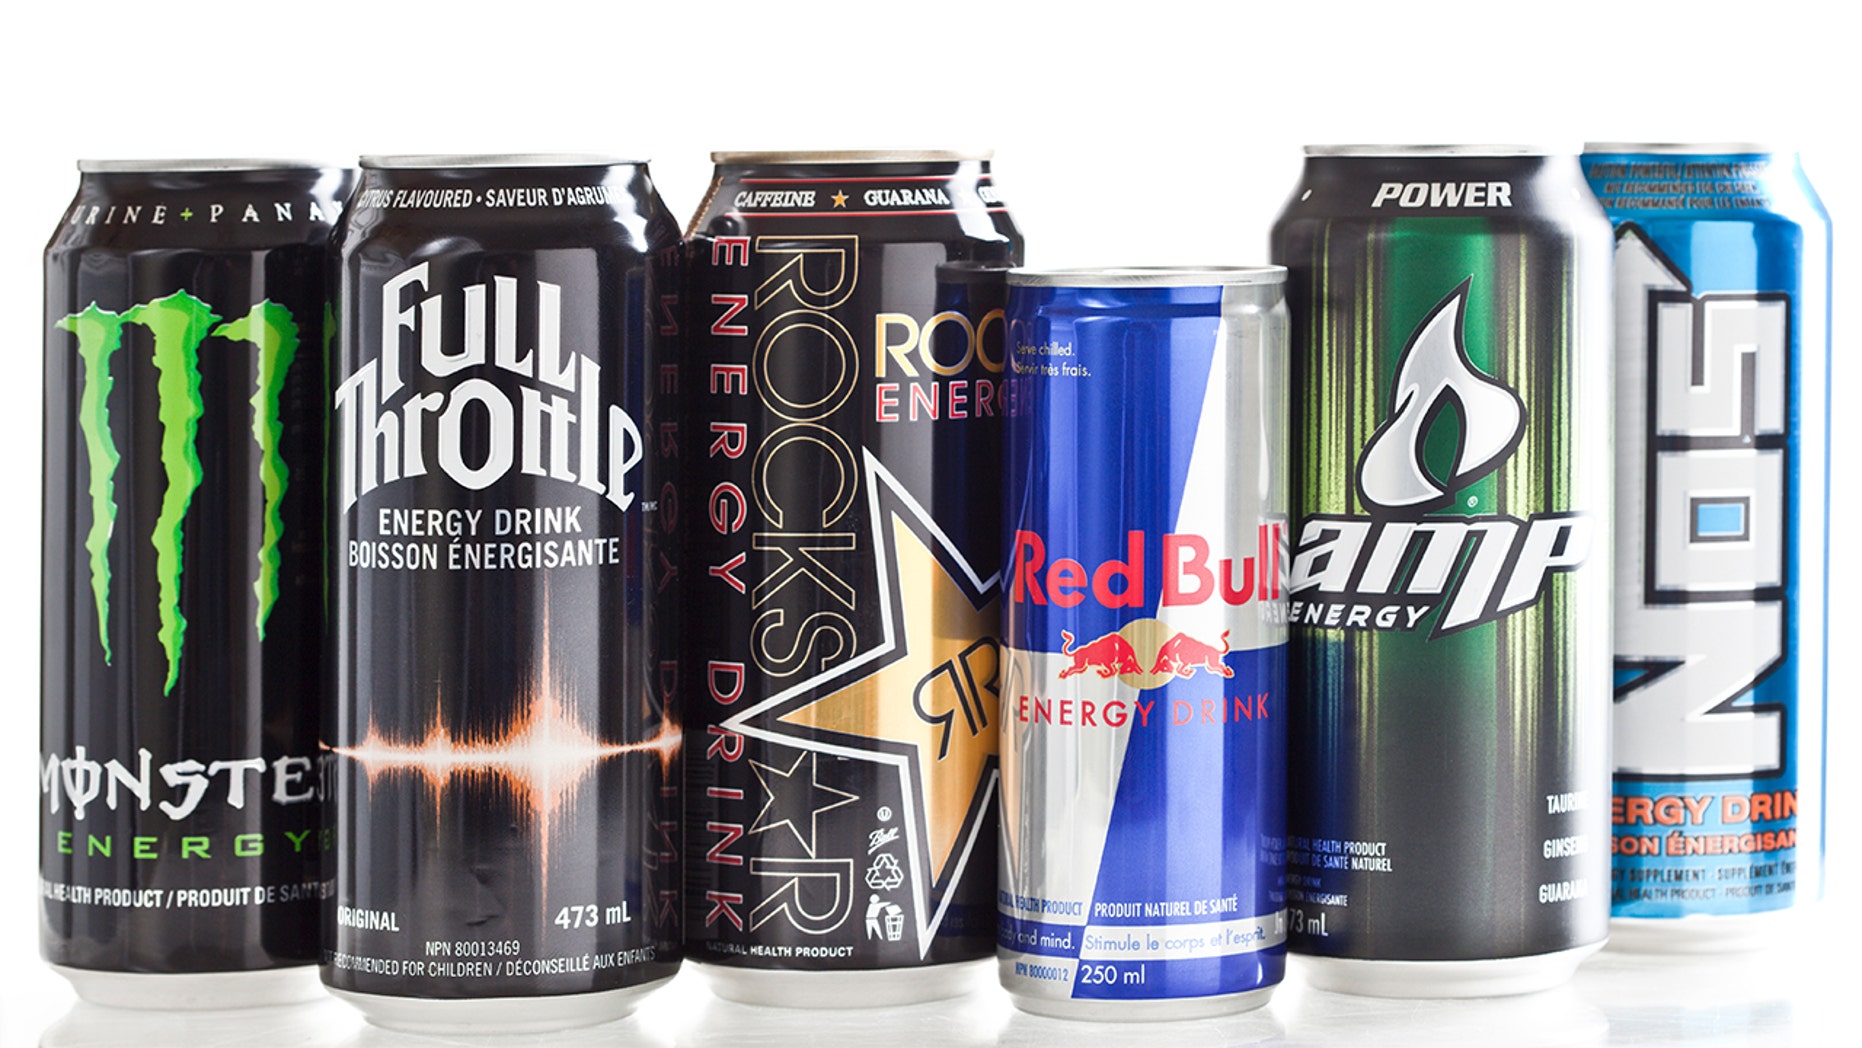 Download Energy drinks could increase risk of cocaine use, study finds | Fox News